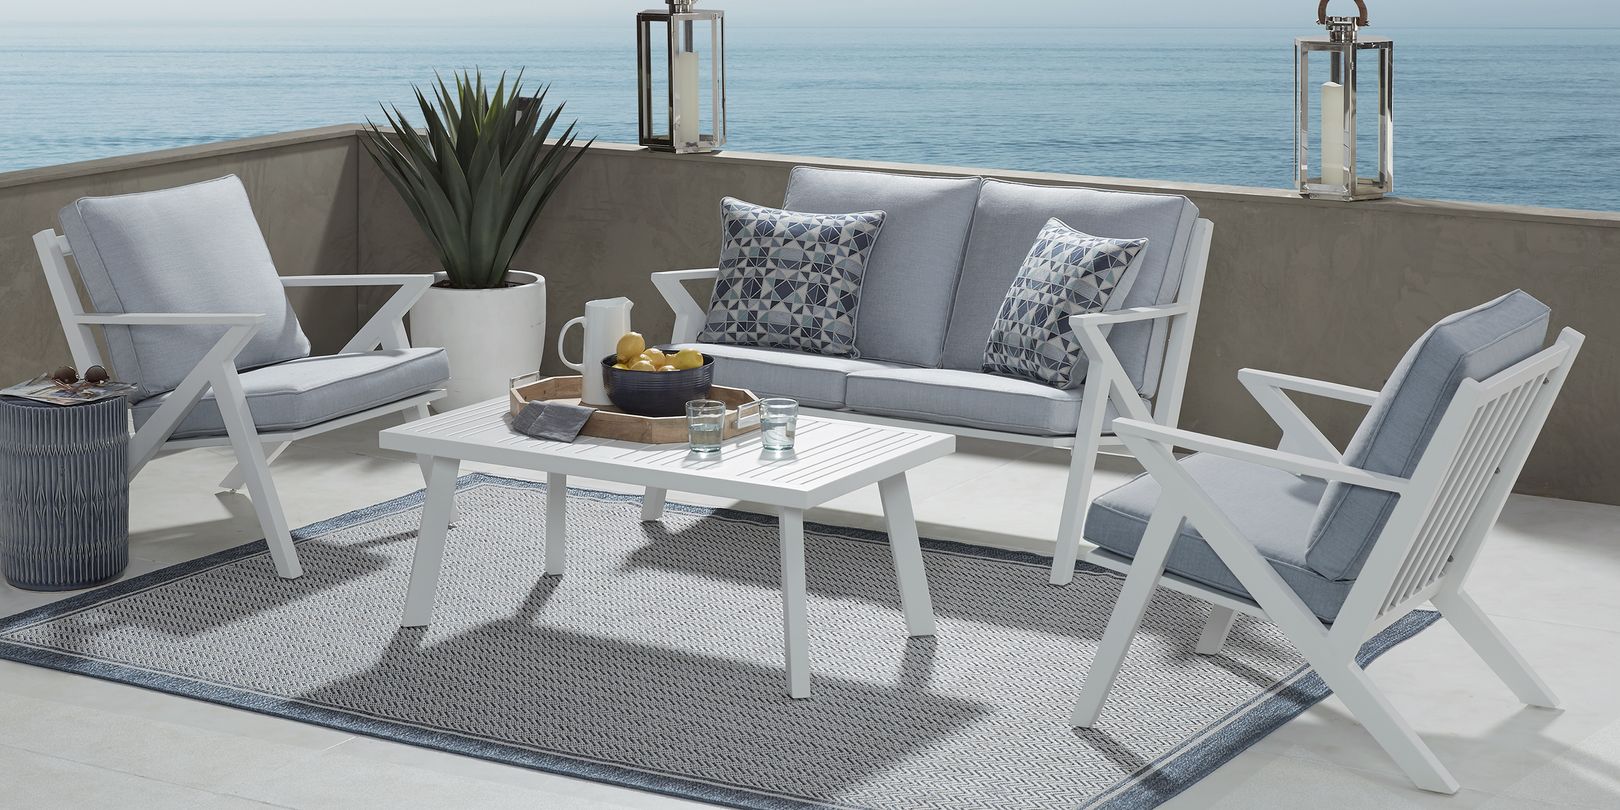 Photo of a white patio seating set with blue cushions and a table